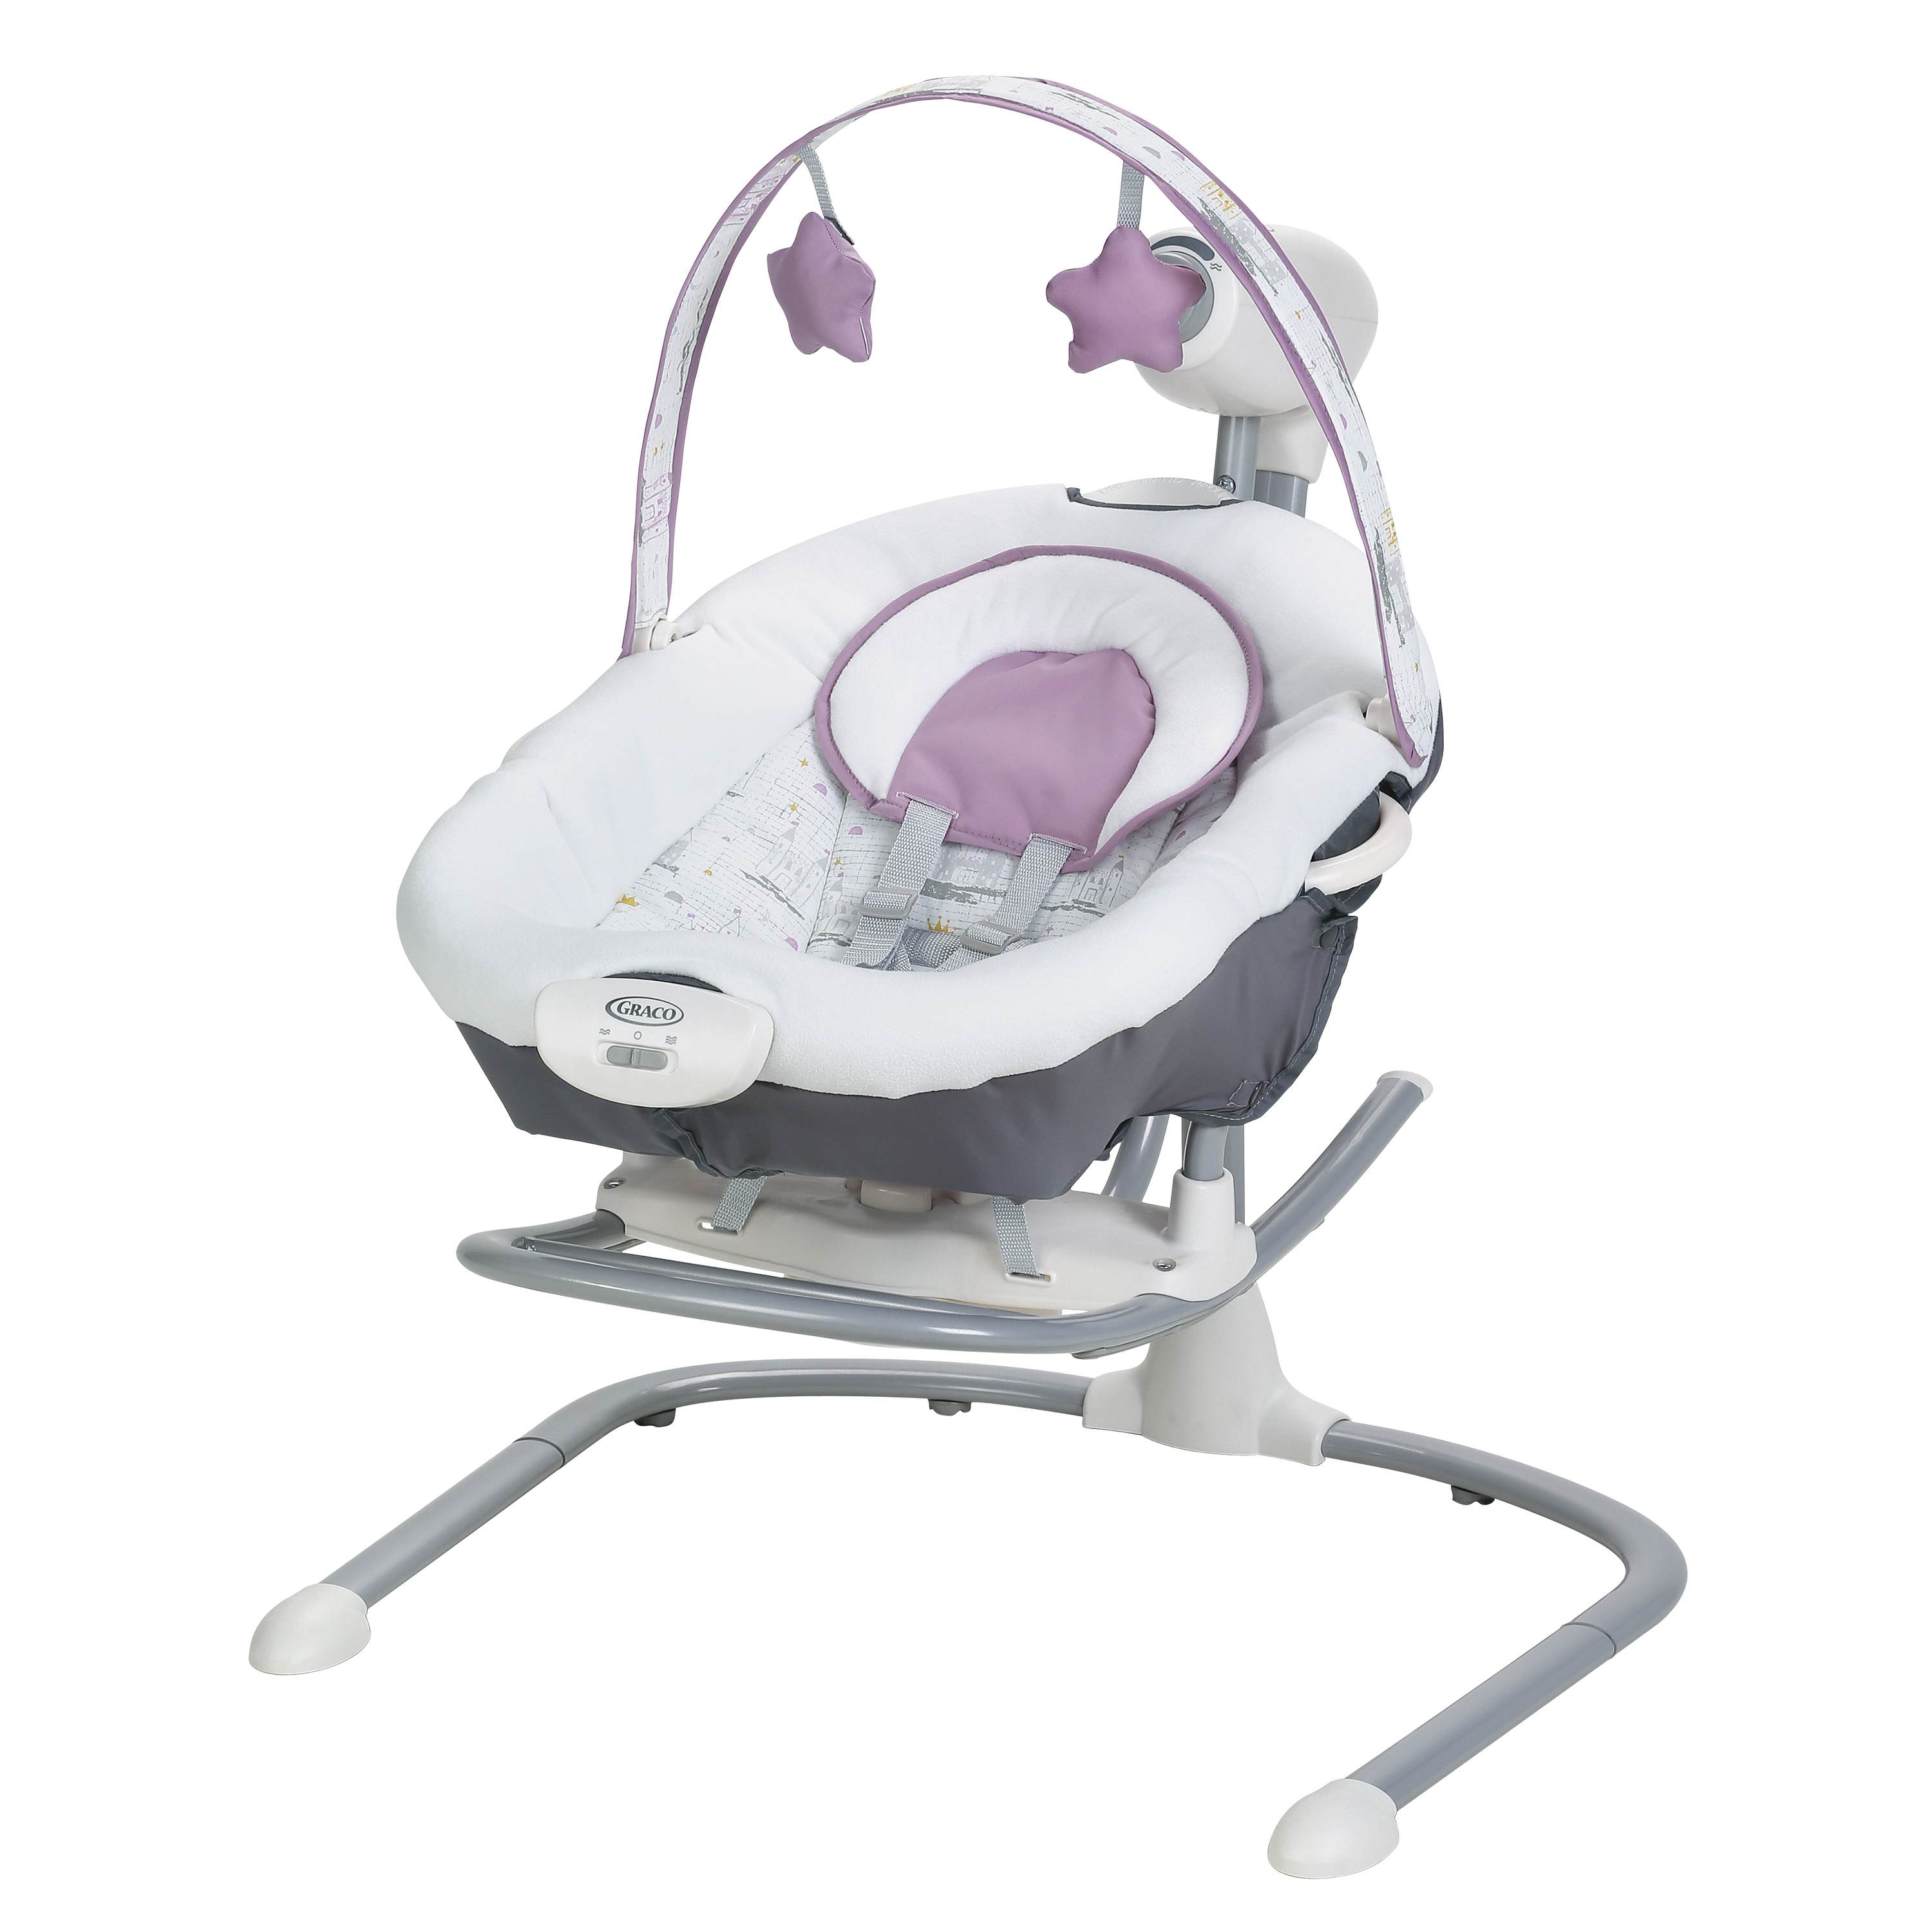 Graco Duet Sway Baby Swing with Portable Rocker